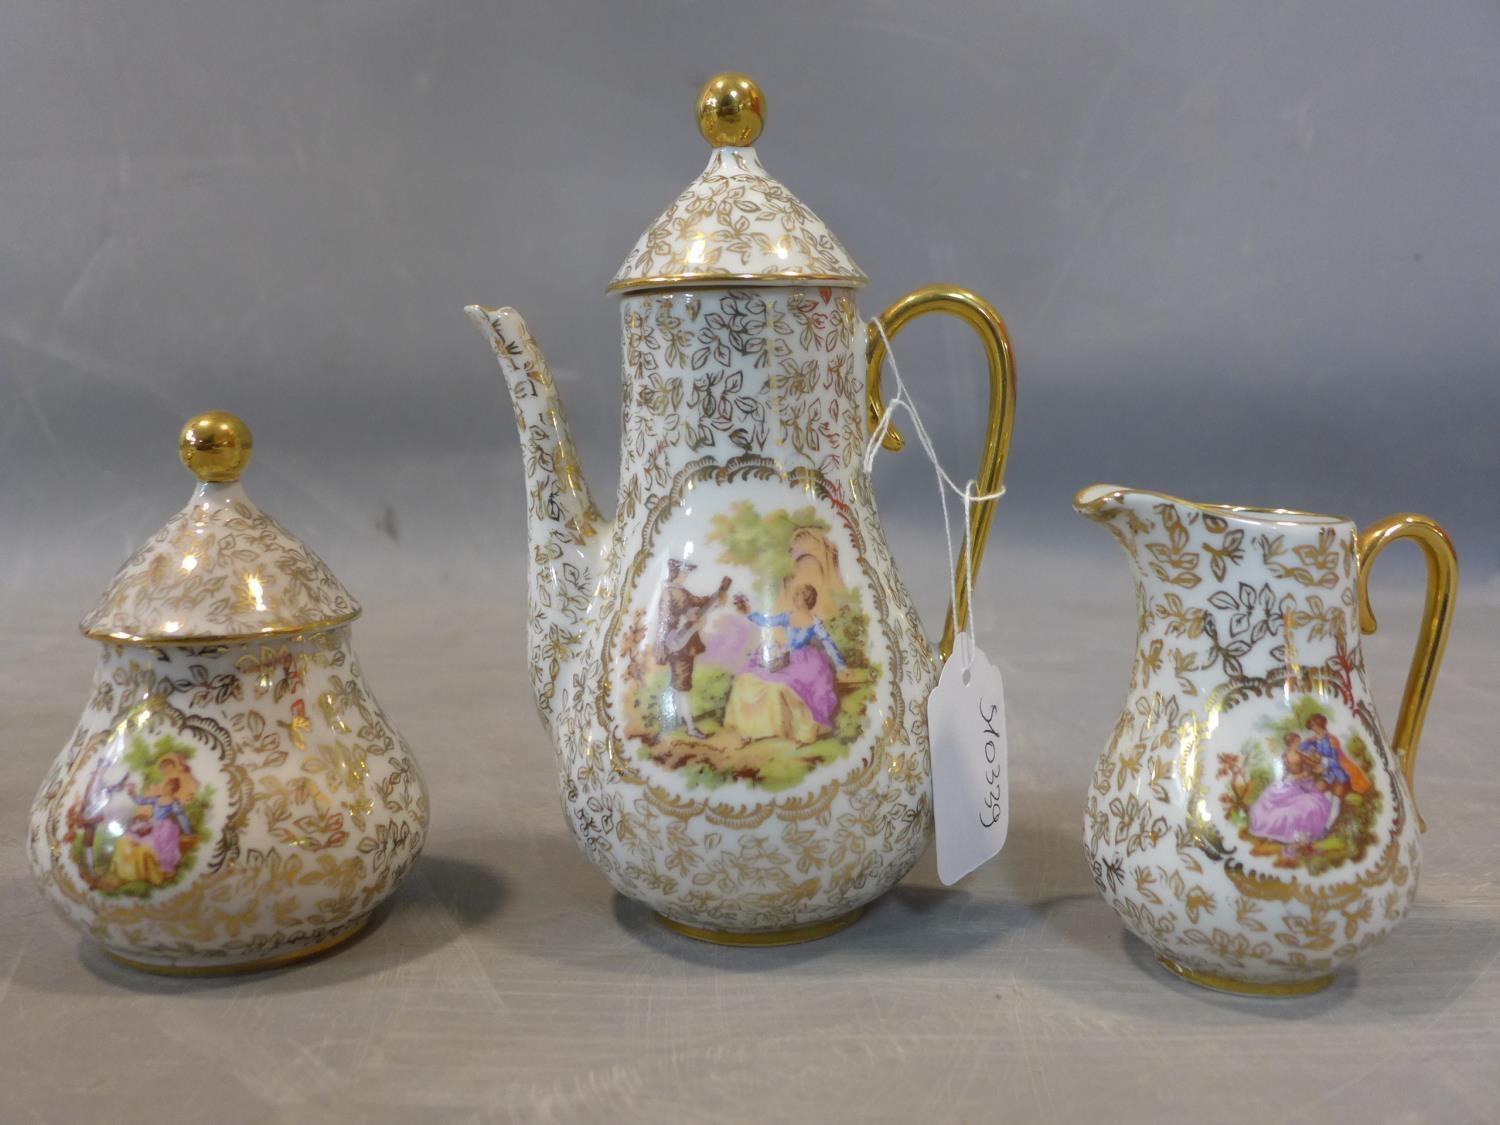 Neo Rococo Coffee set by Dekor Stil Limoges, including six cups and saucers, coffee pot, sugar bowl, - Image 3 of 3